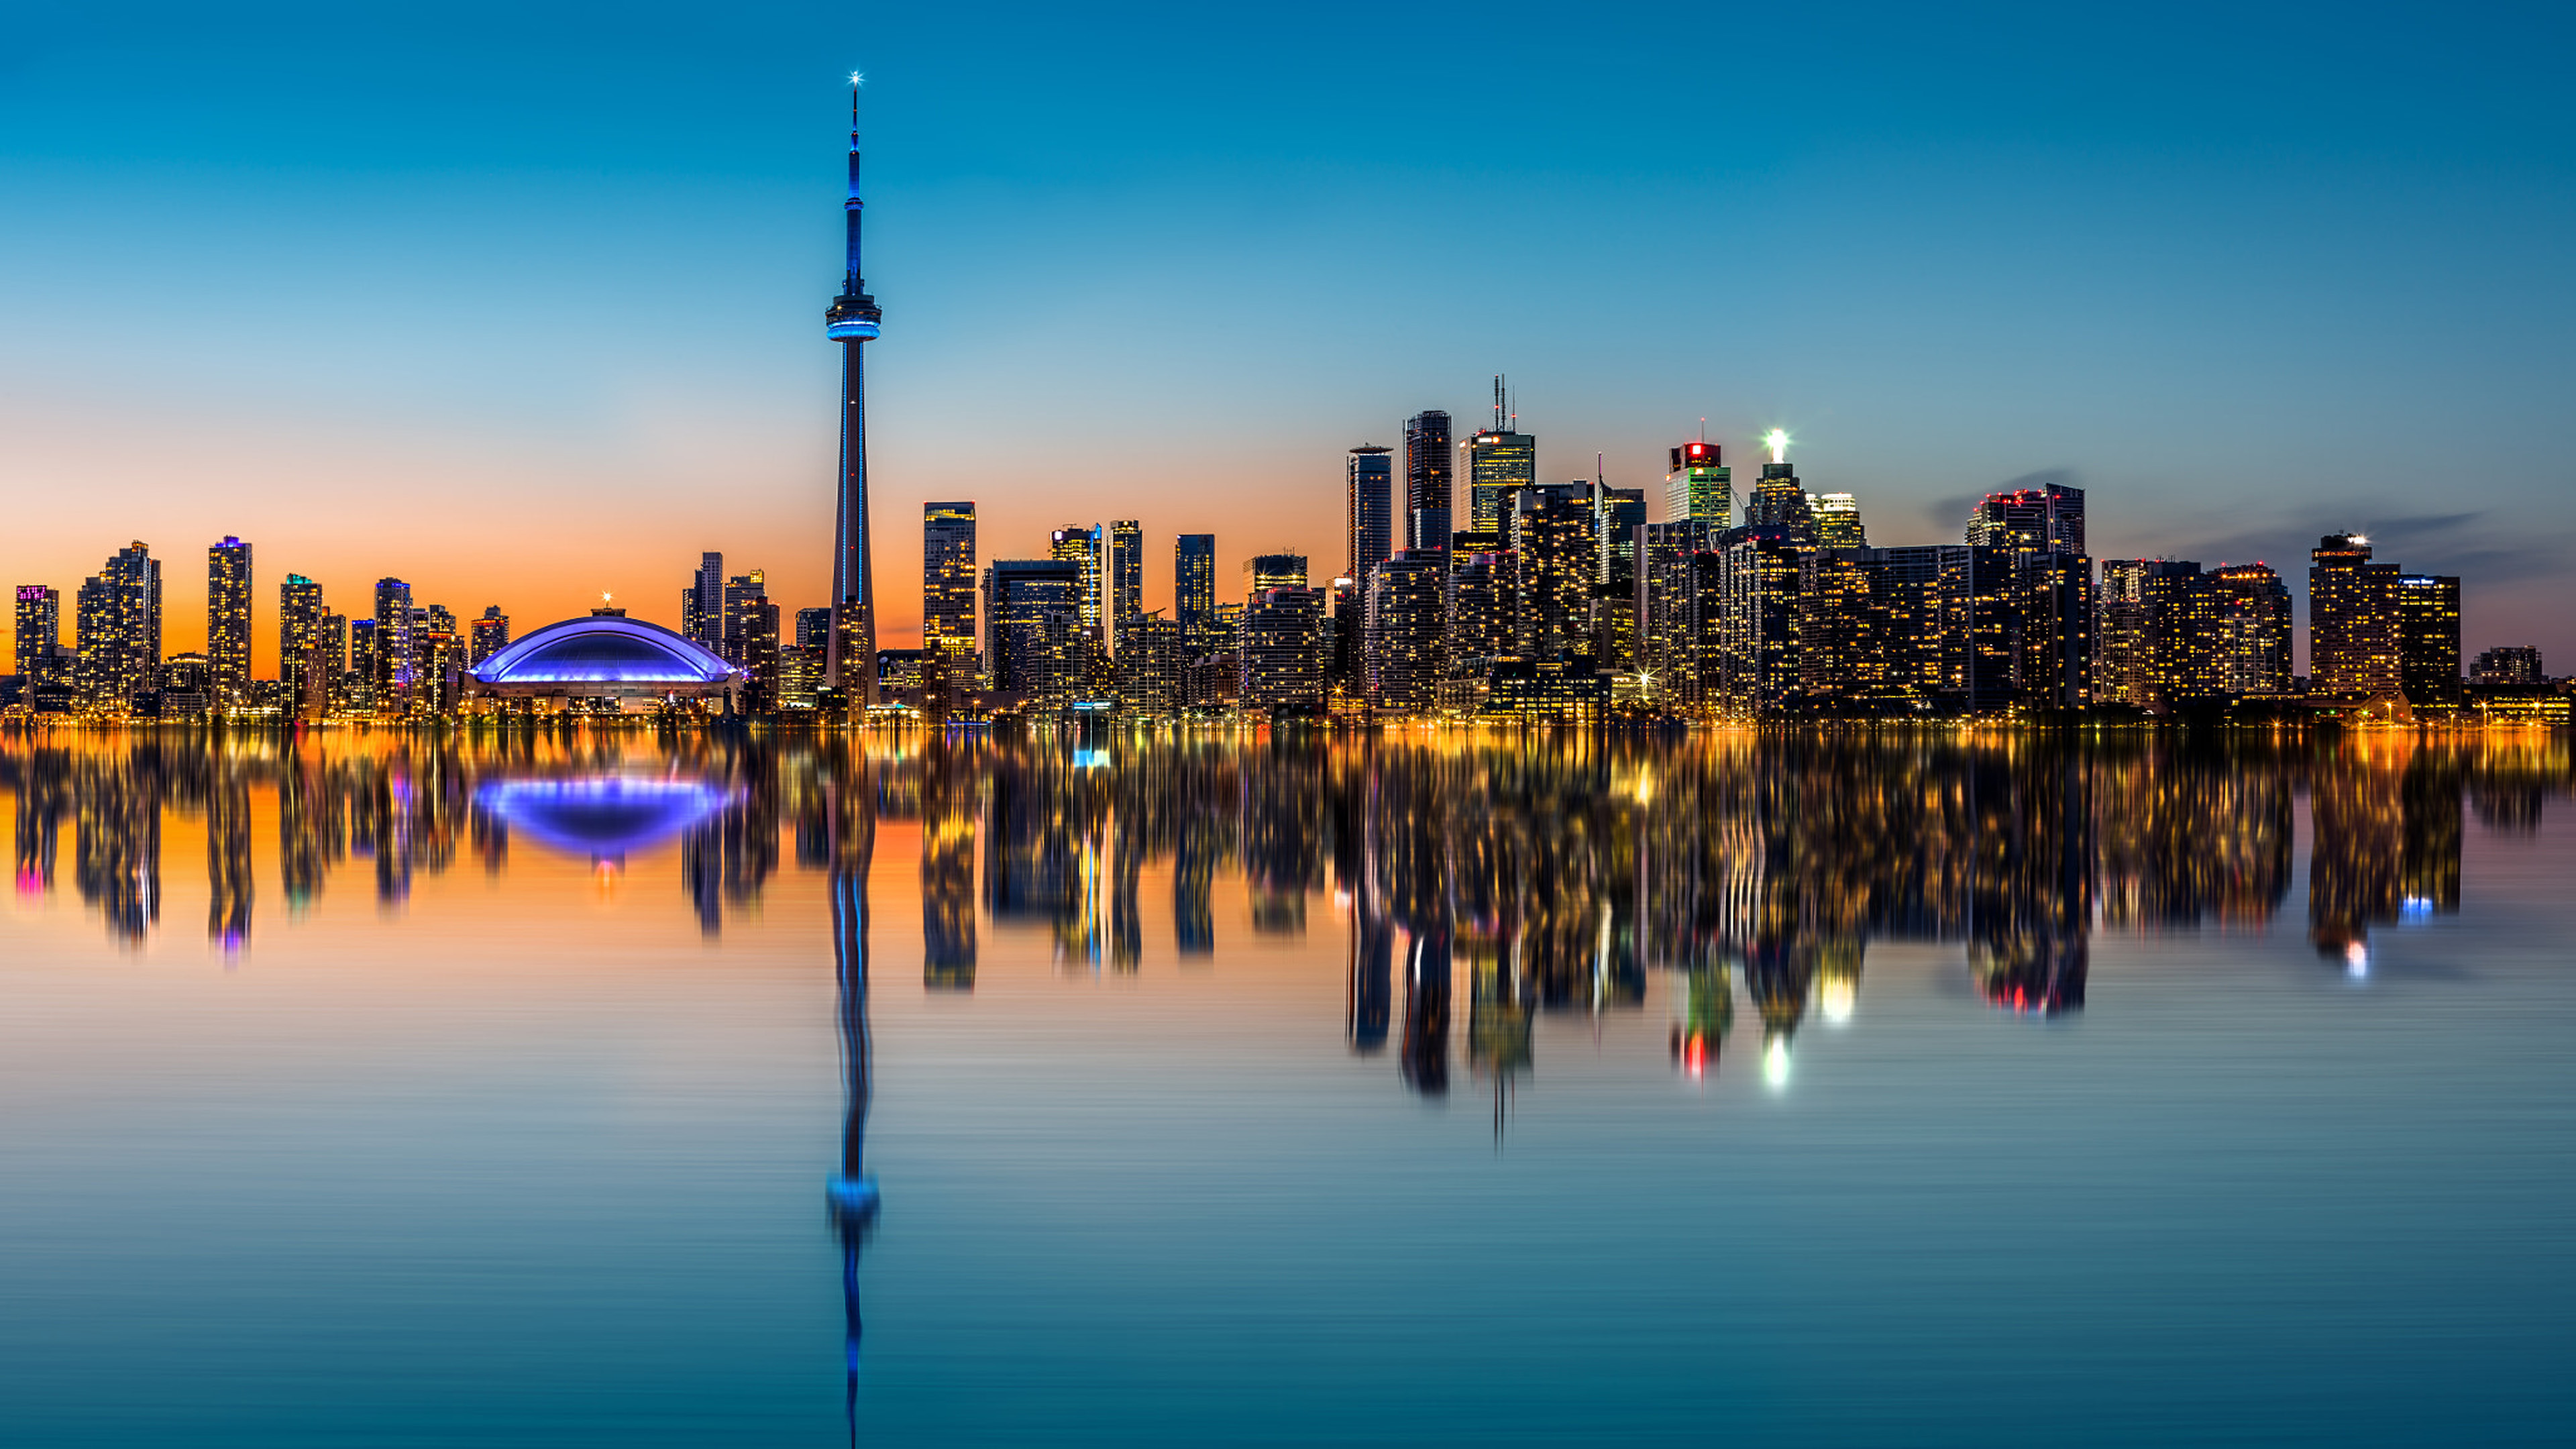 Toronto Skyline Reflection Of Buildings In Harbor Bay Harbor Bay Toronto  Canada Night Landscape Hd Wallpapers For Tablets Free Download   Wallpapers13com